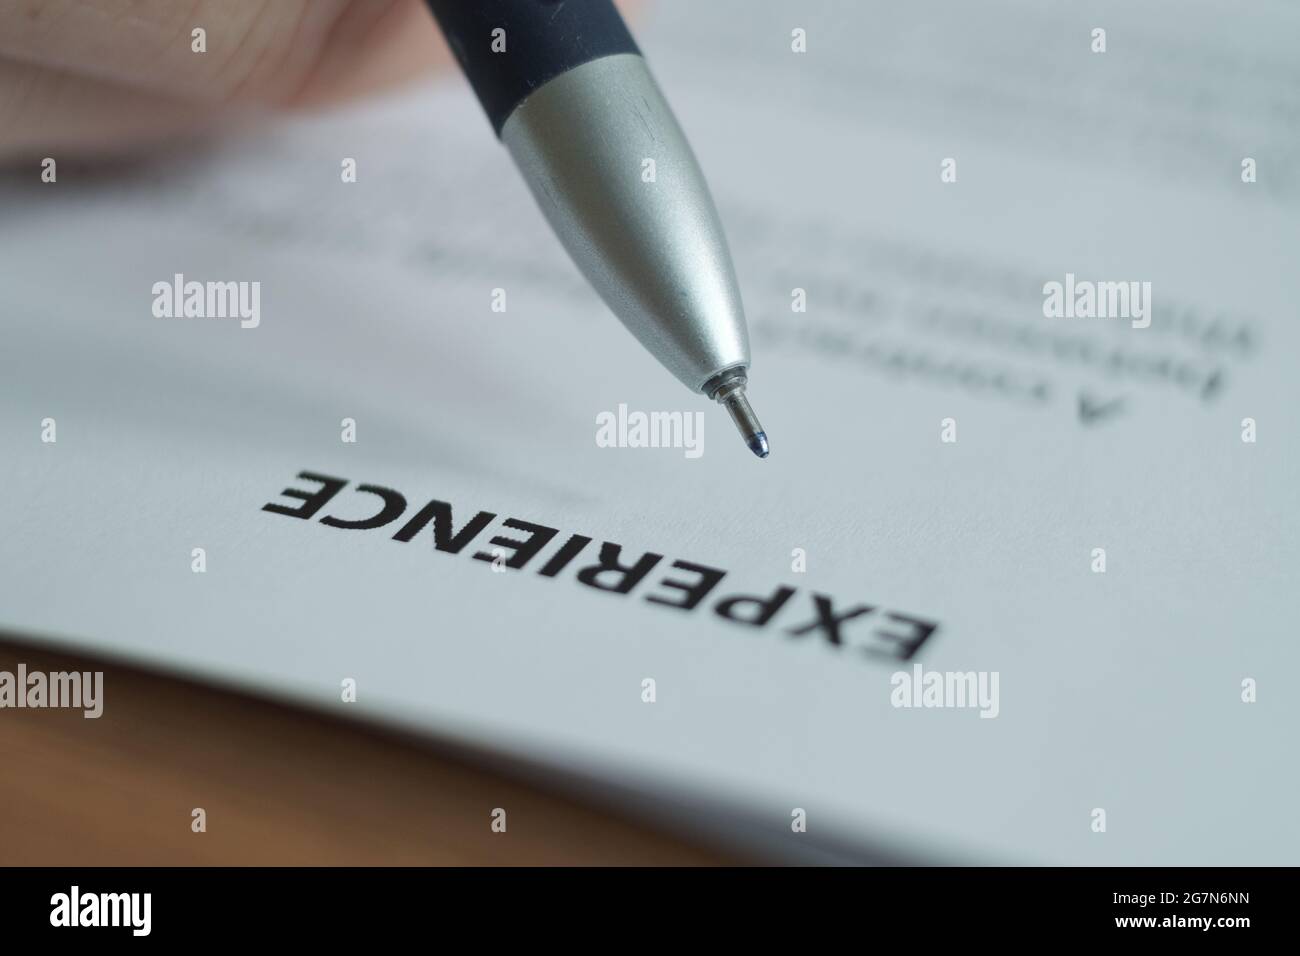 The word experience is written on a white sheet of paper, a pen is placed above the word. Blurred image. Stock Photo